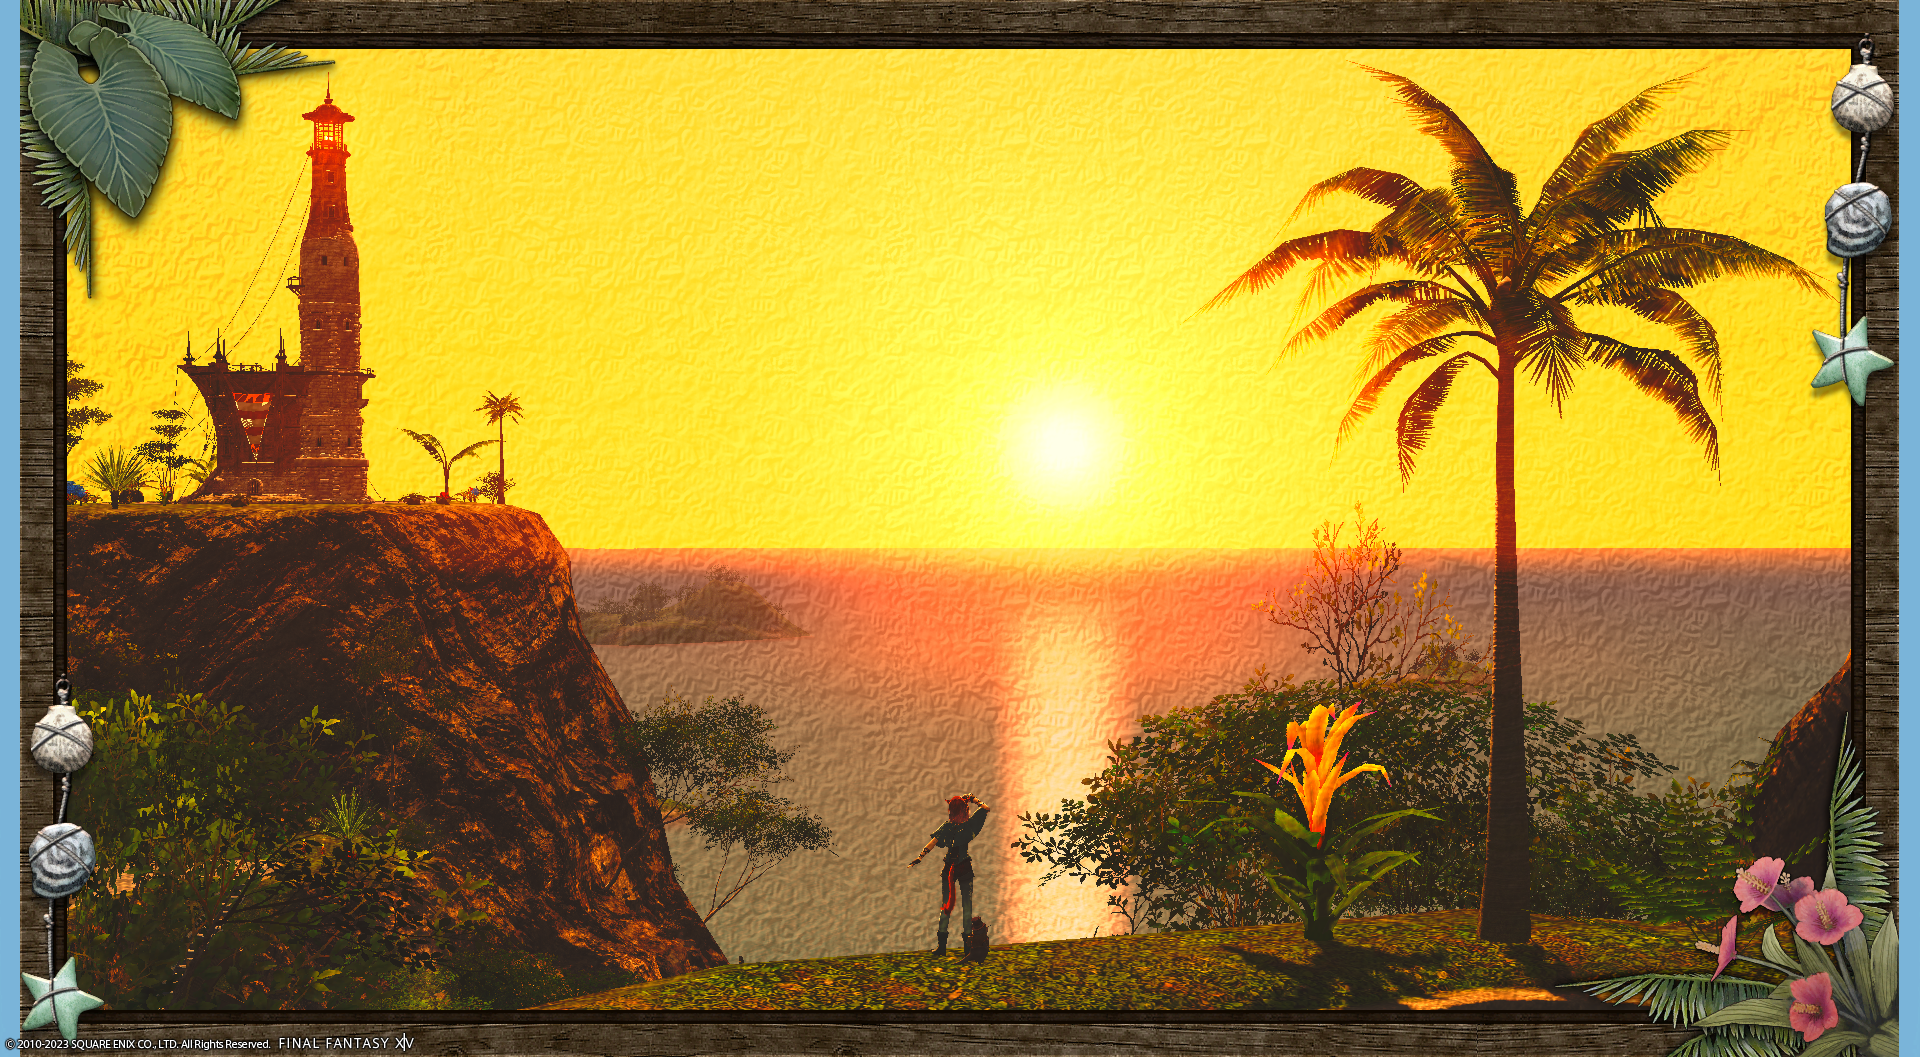 A screenshot from FFXIV. It depicts a character on a hill next to a light house, overlooking the ocean during sunset.